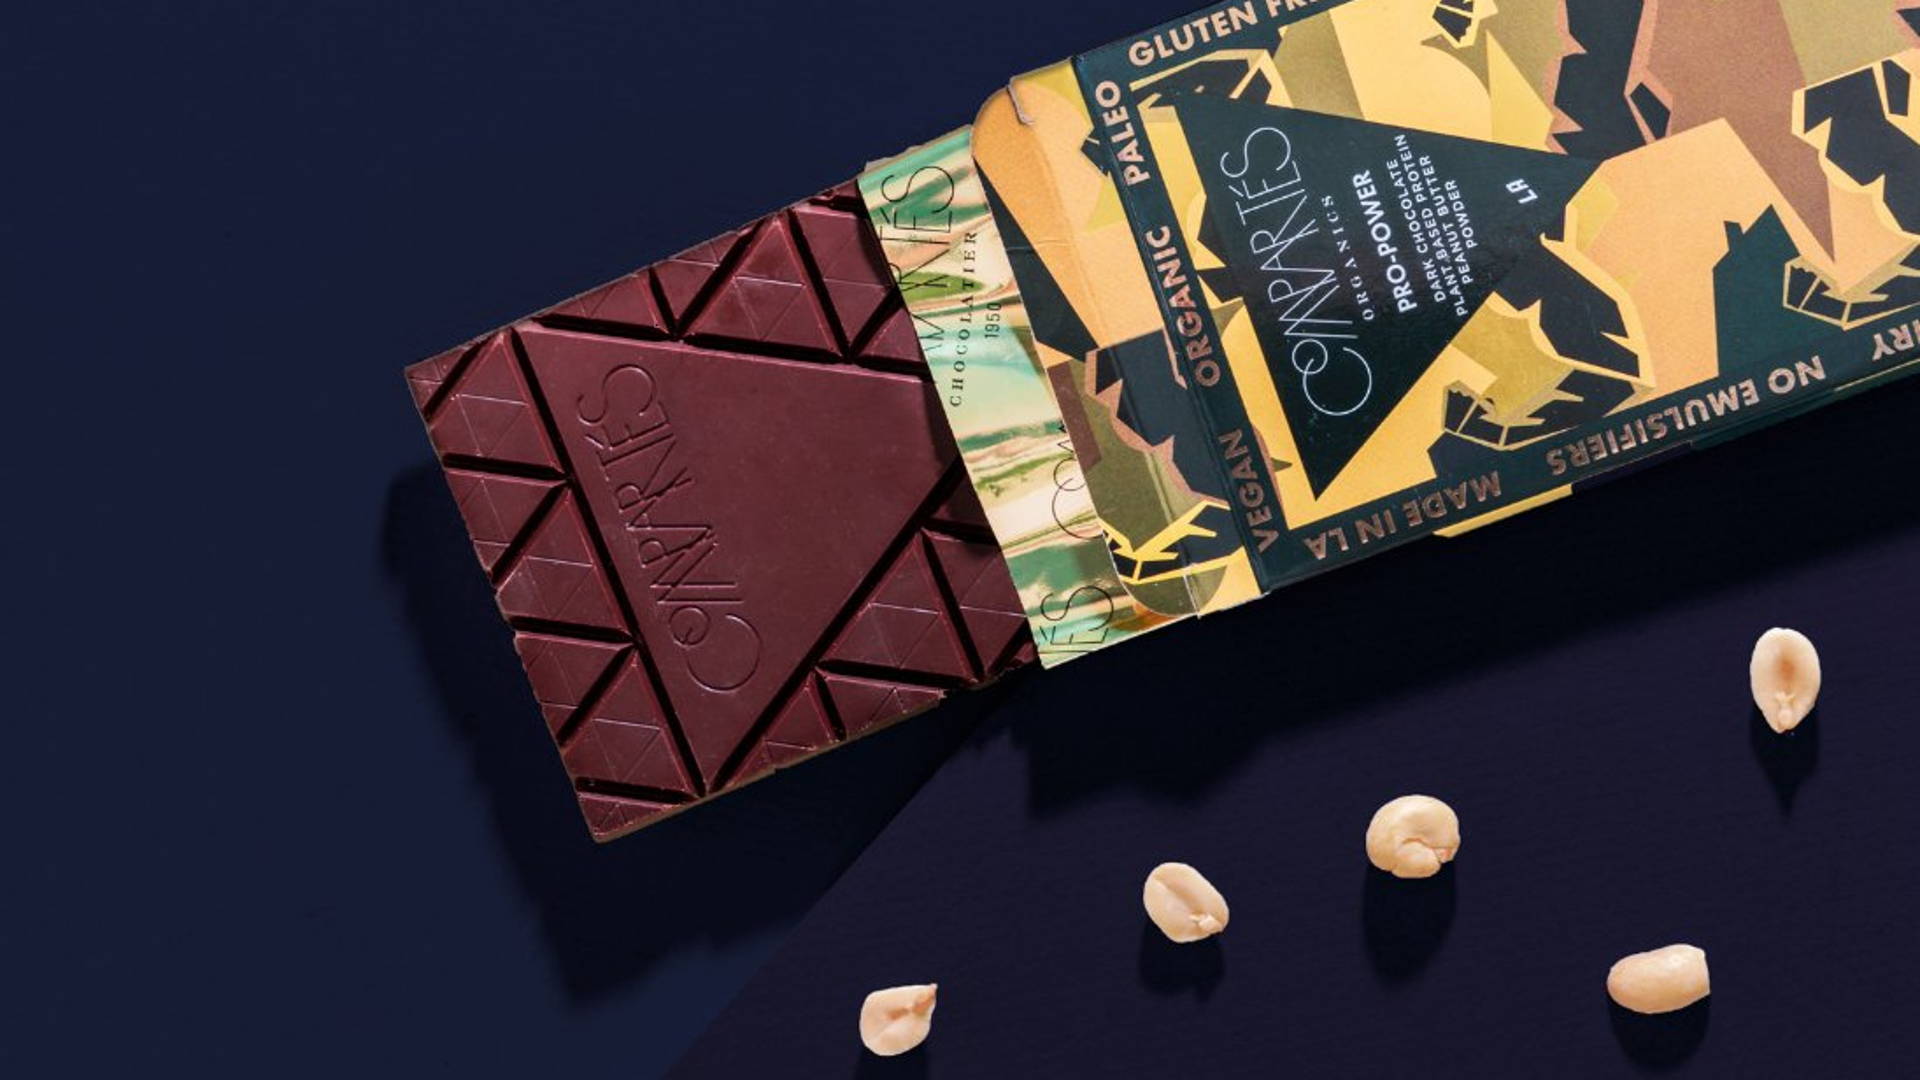 Featured image for Compartés Newest Organic Line of Chocolate Promotes Wellness